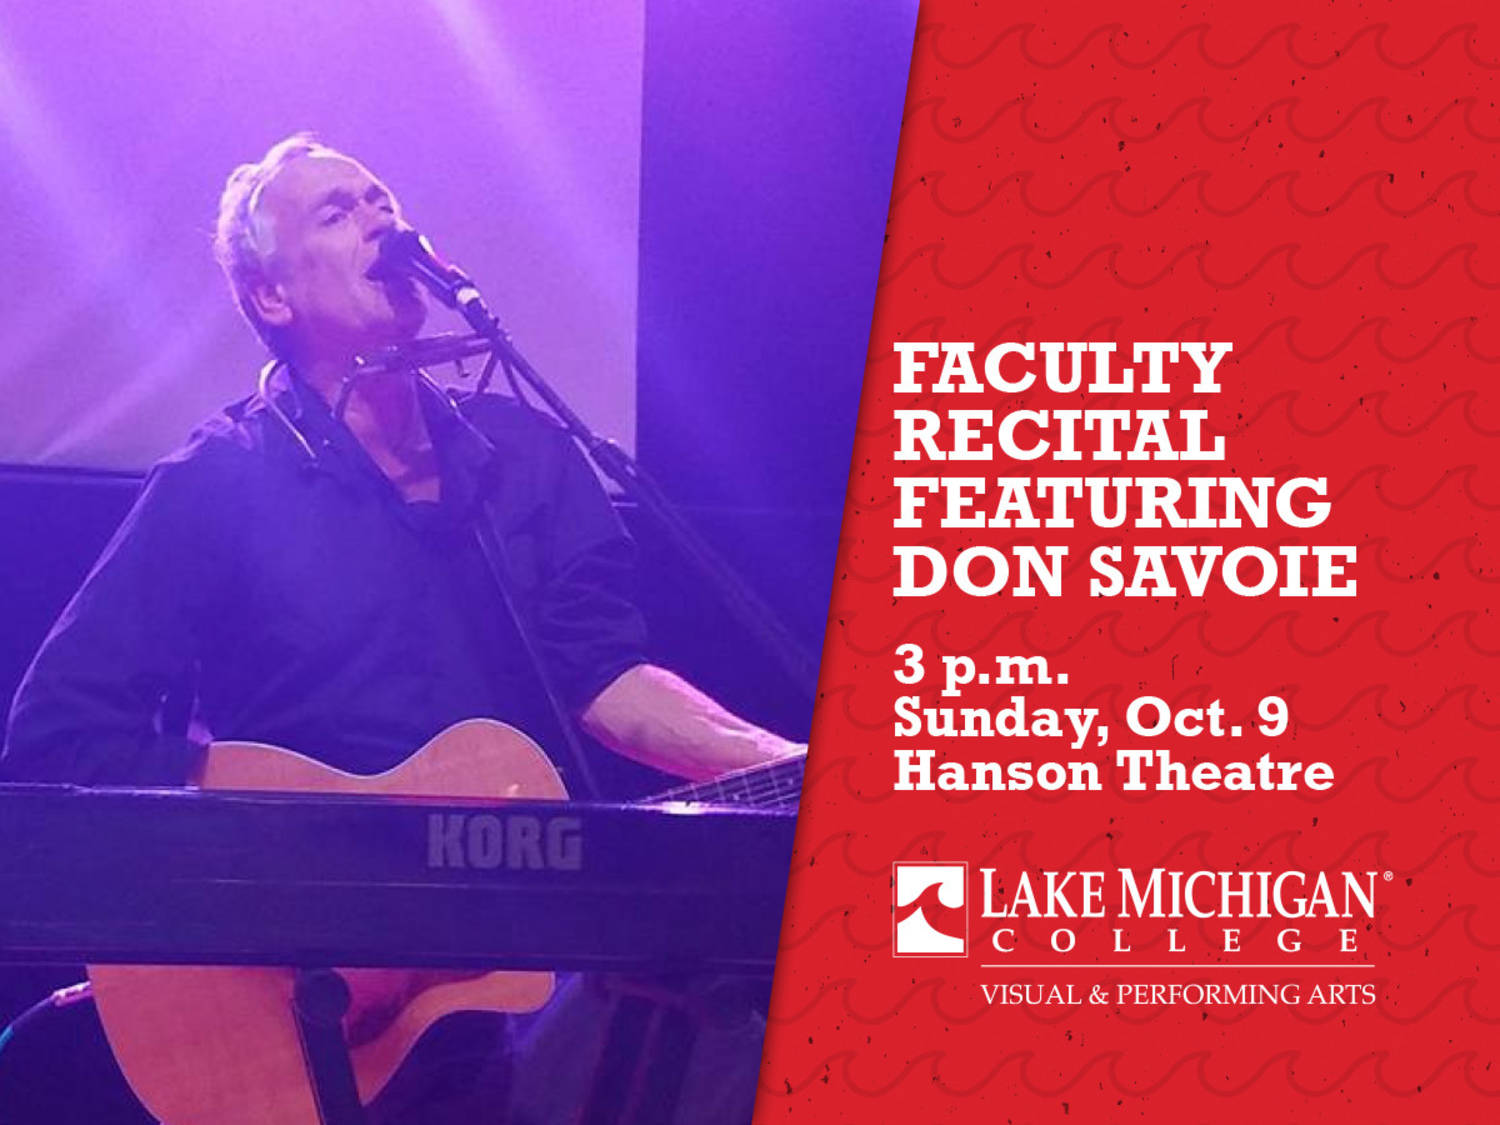 Blue-eyed soul artist to be featured during Lake Michigan College fall faculty recital